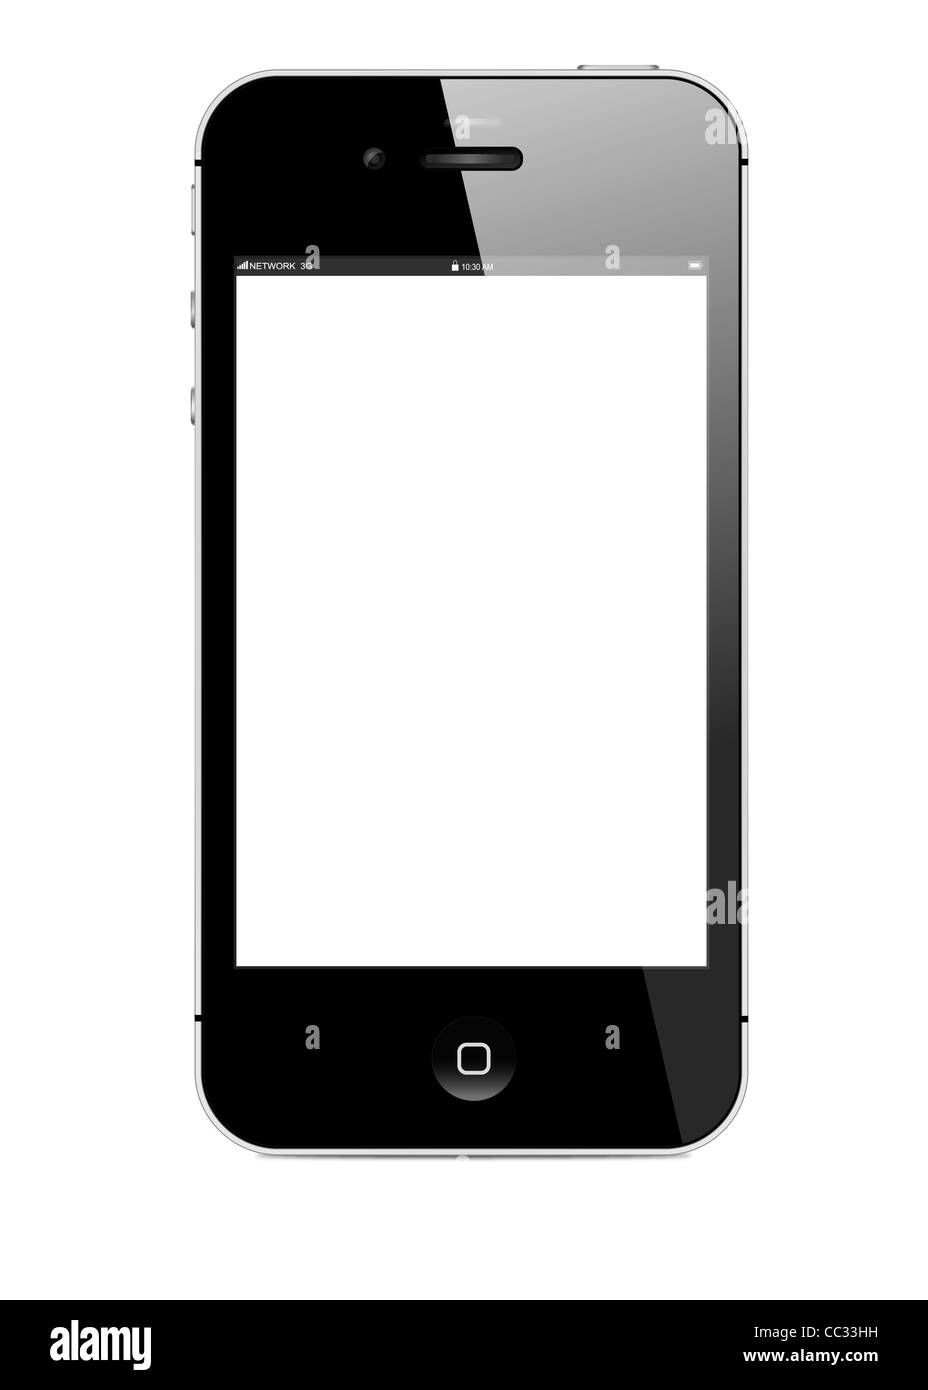 illustration of iPhone 4s, vector format Stock Photo